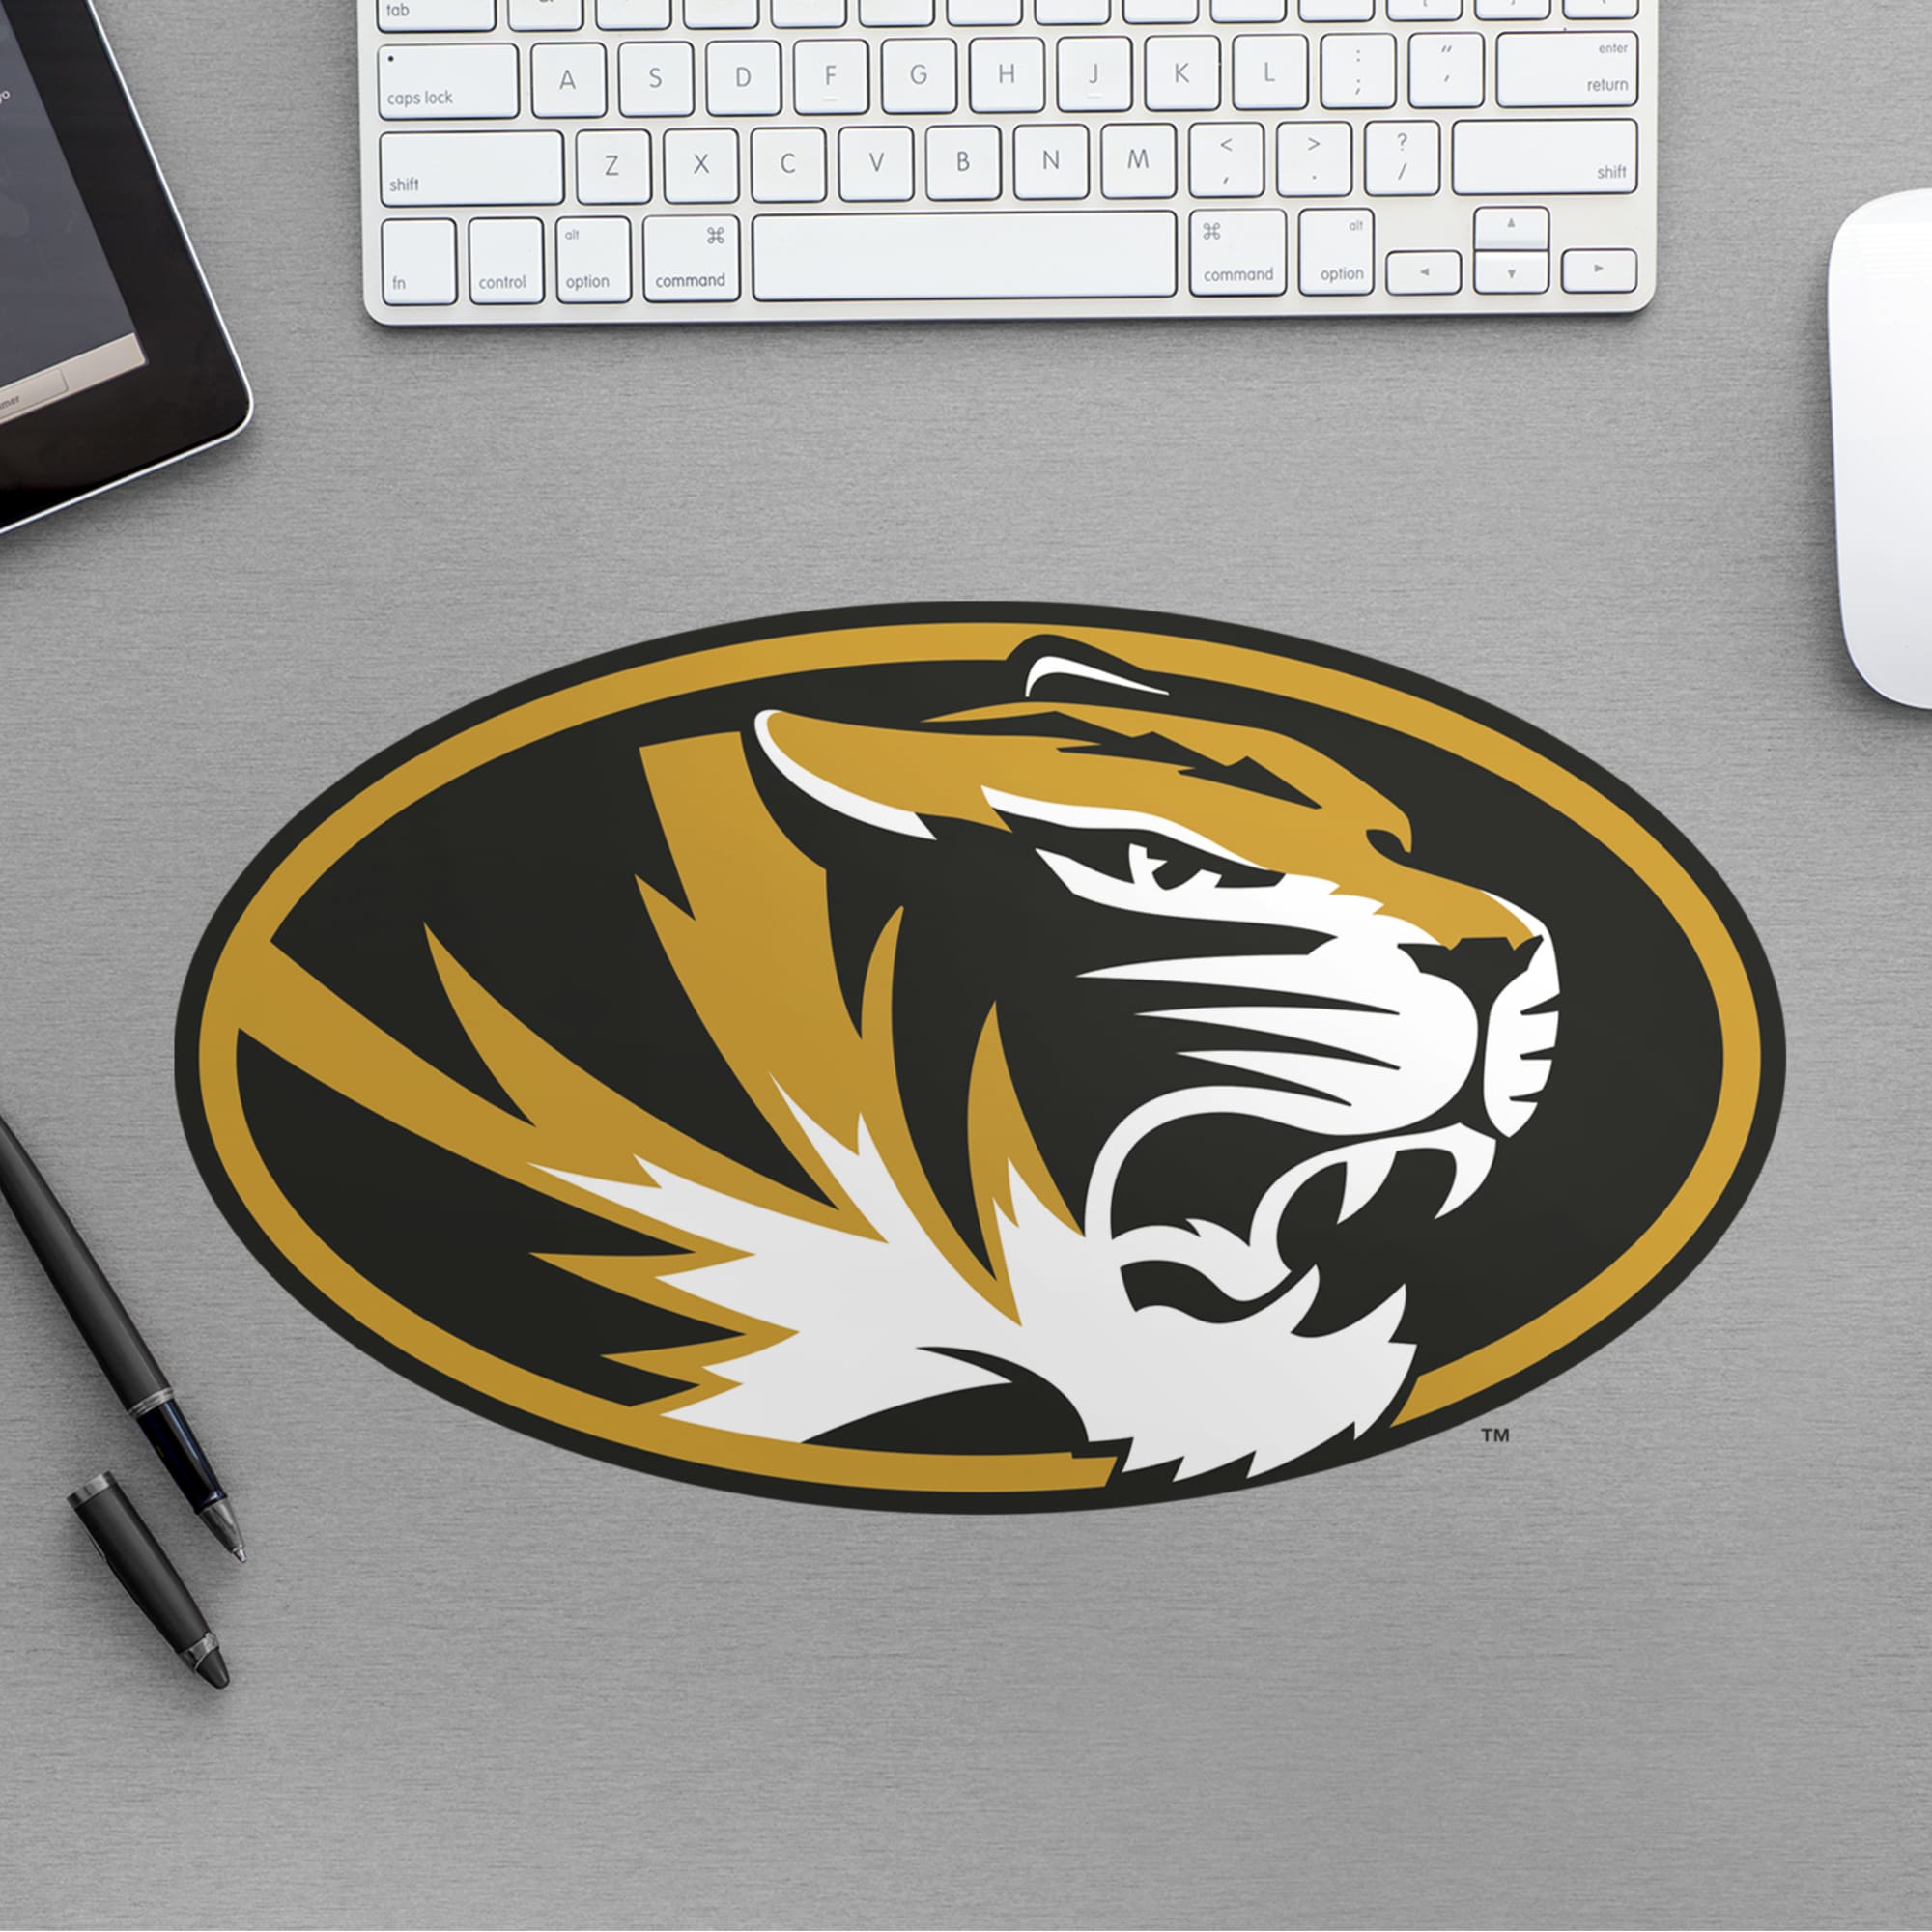 Missouri Tigers: Logo - Officially Licensed Removable Wall Decal 9.0"W x 11.0"H by Fathead | Vinyl